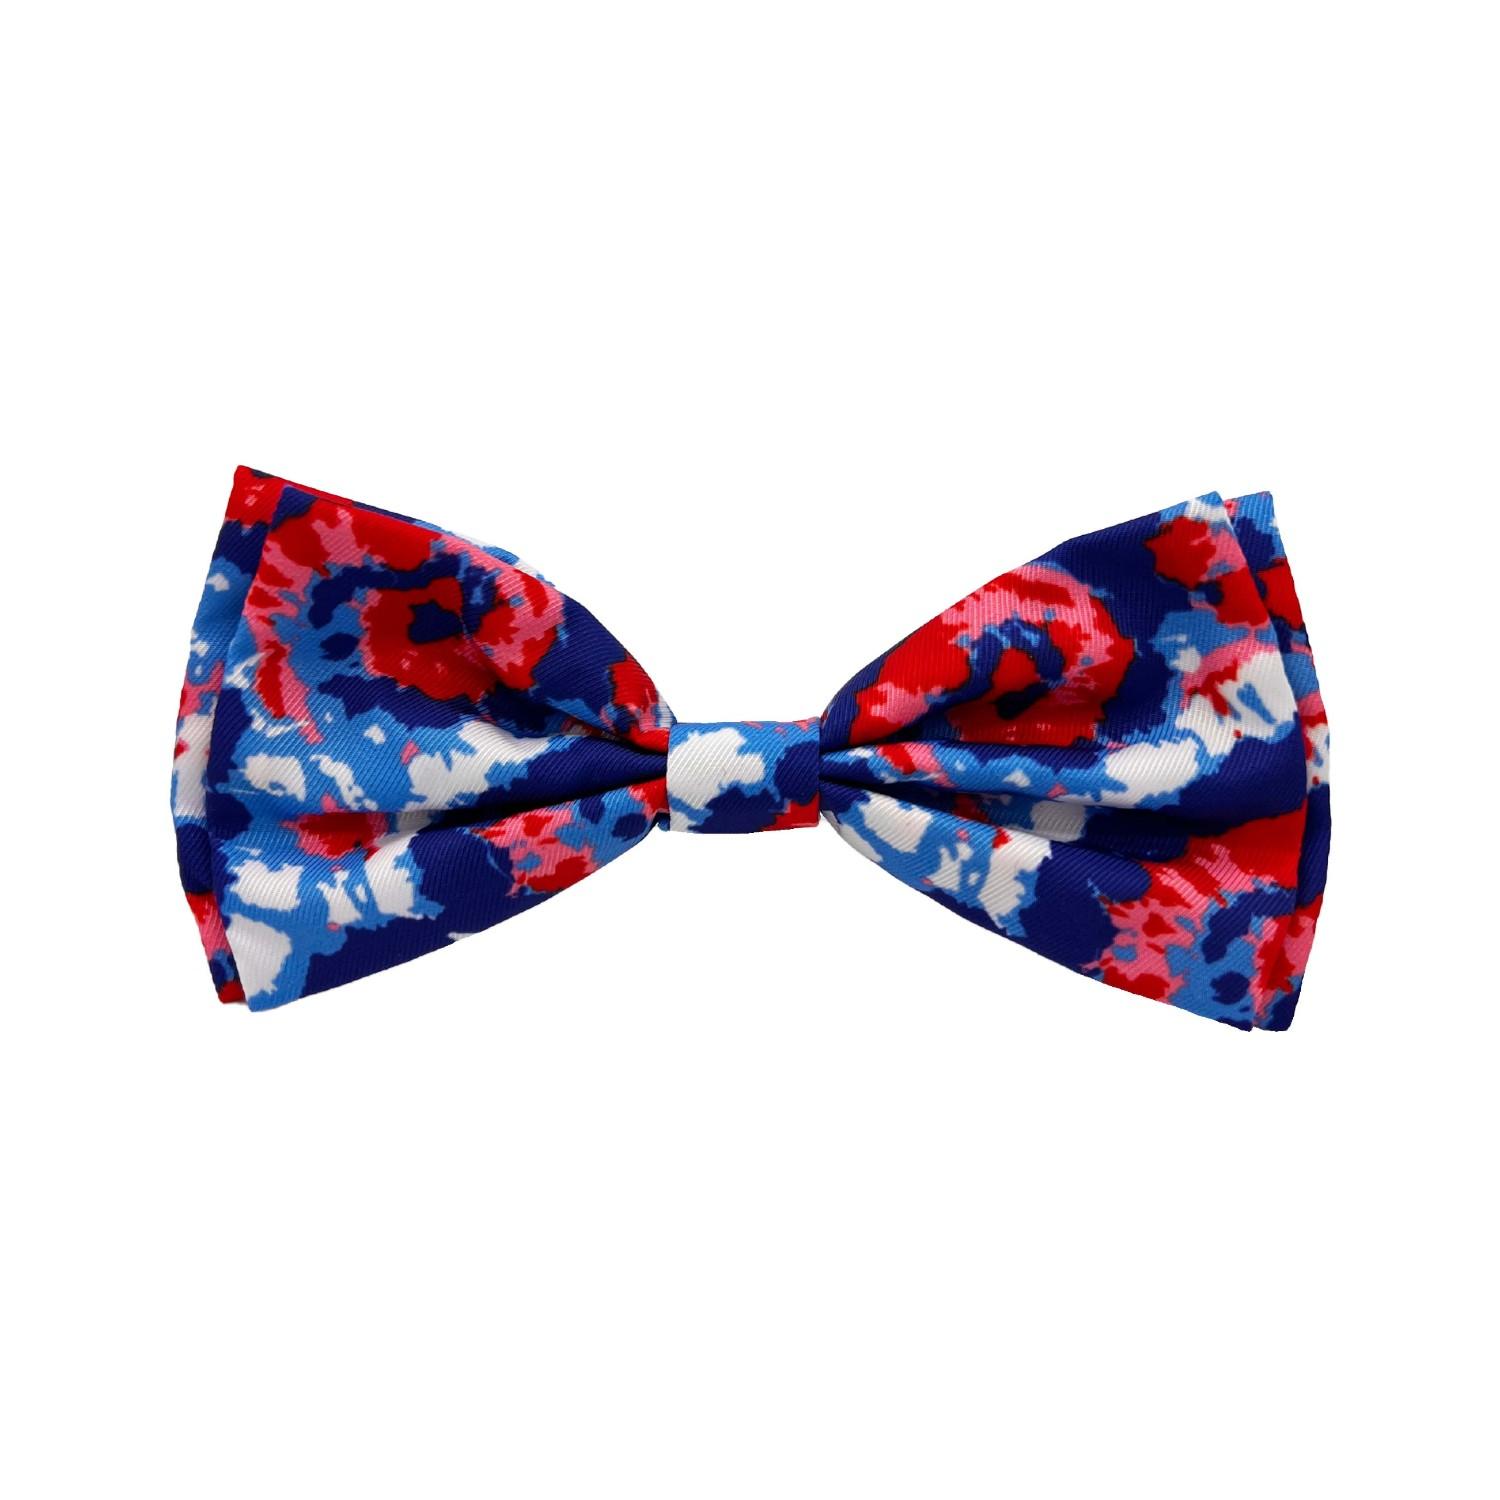 Huxley & Kent Patriotic Dog and Cat Bow Tie Collar Attachment - American Tie Dye